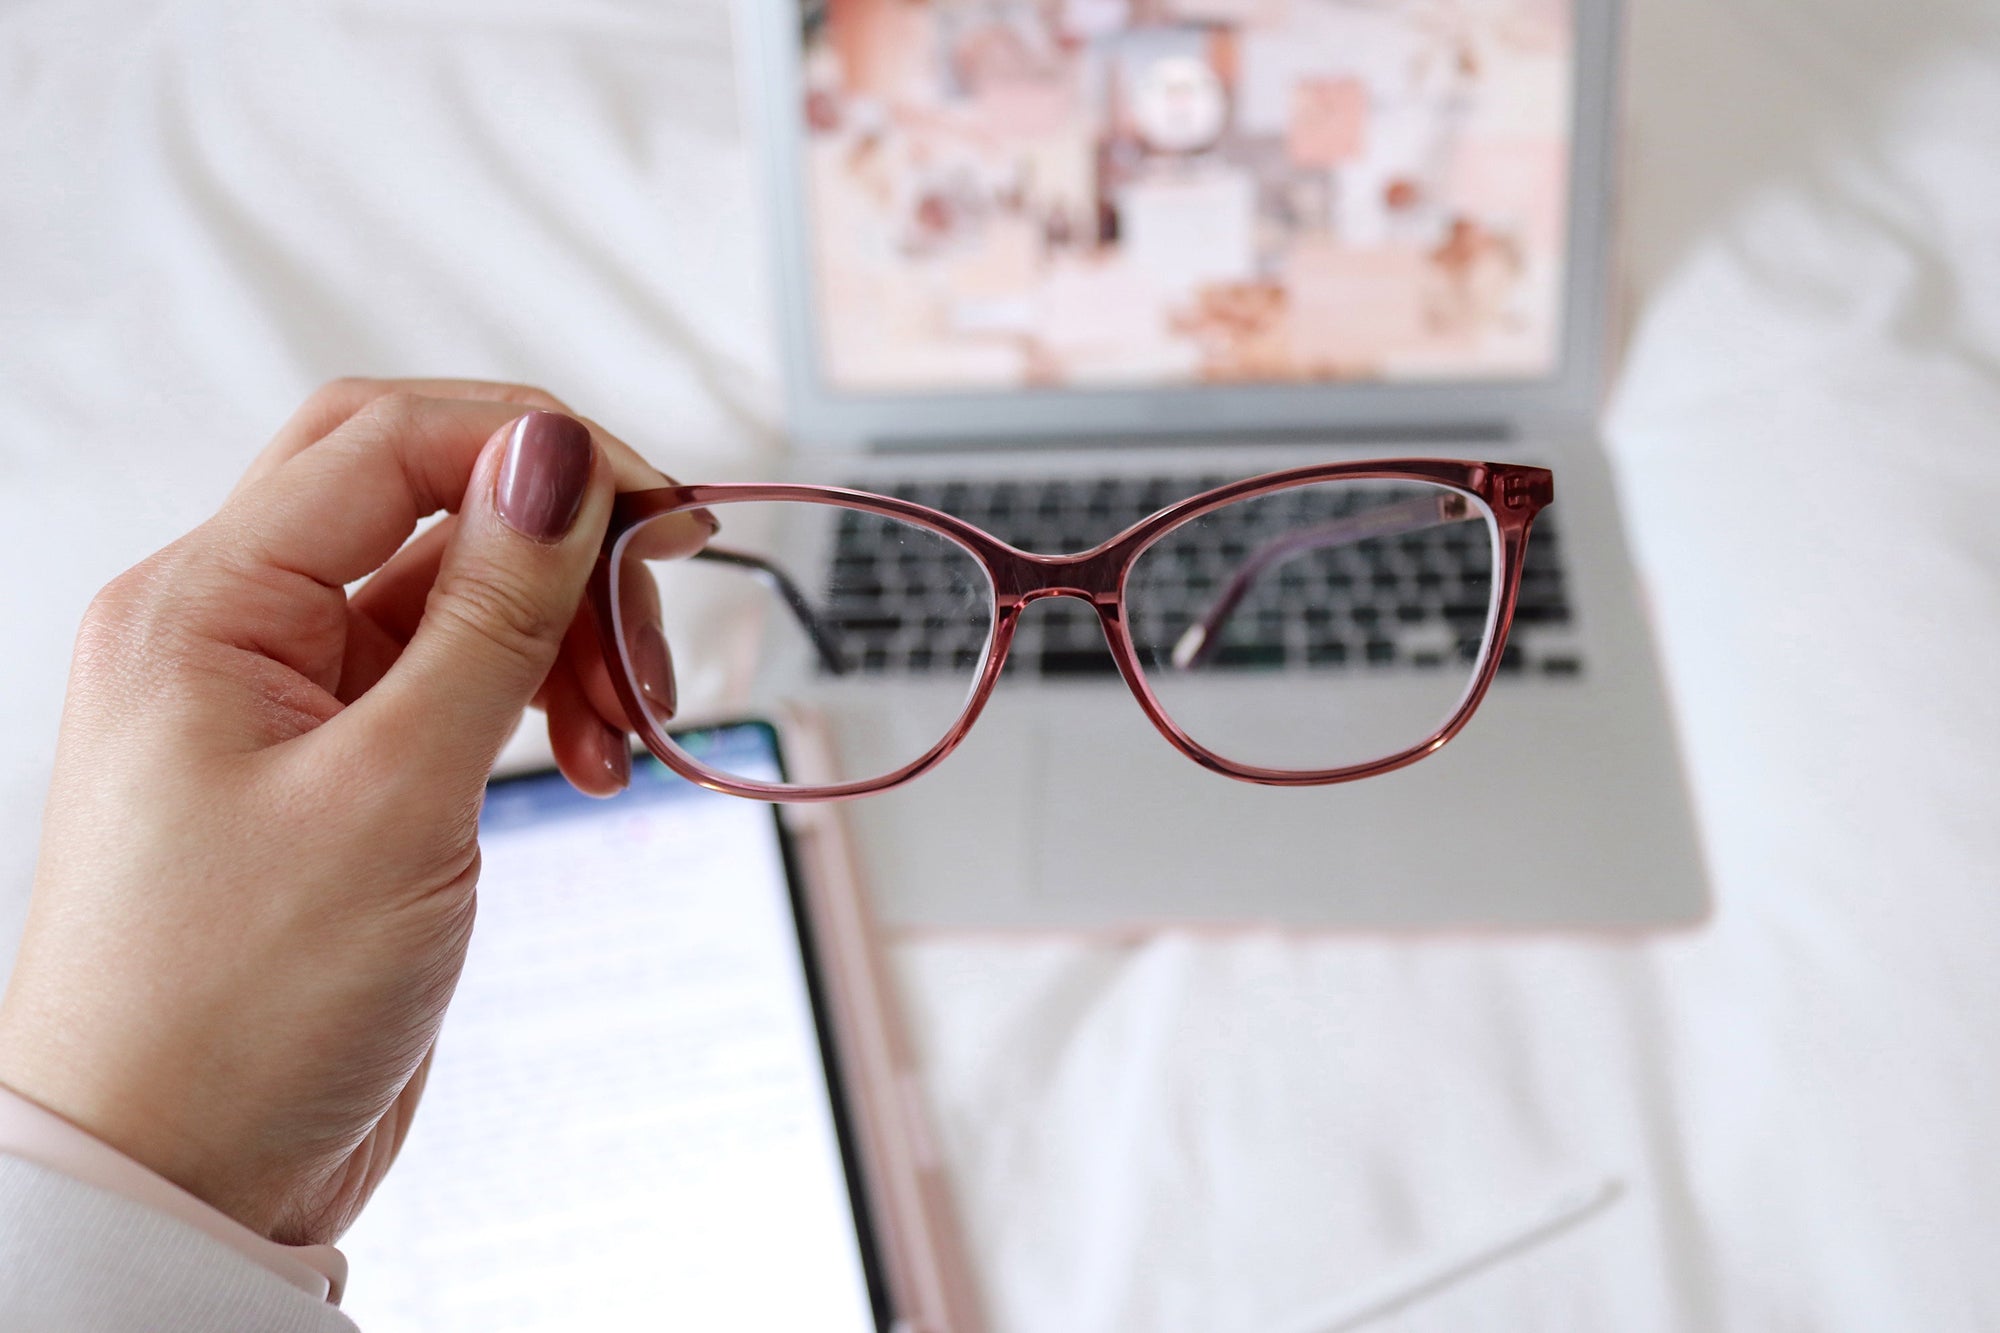 How Do You Get Rid Of Computer Vision Syndrome? | KOALAEYE OPTICAL